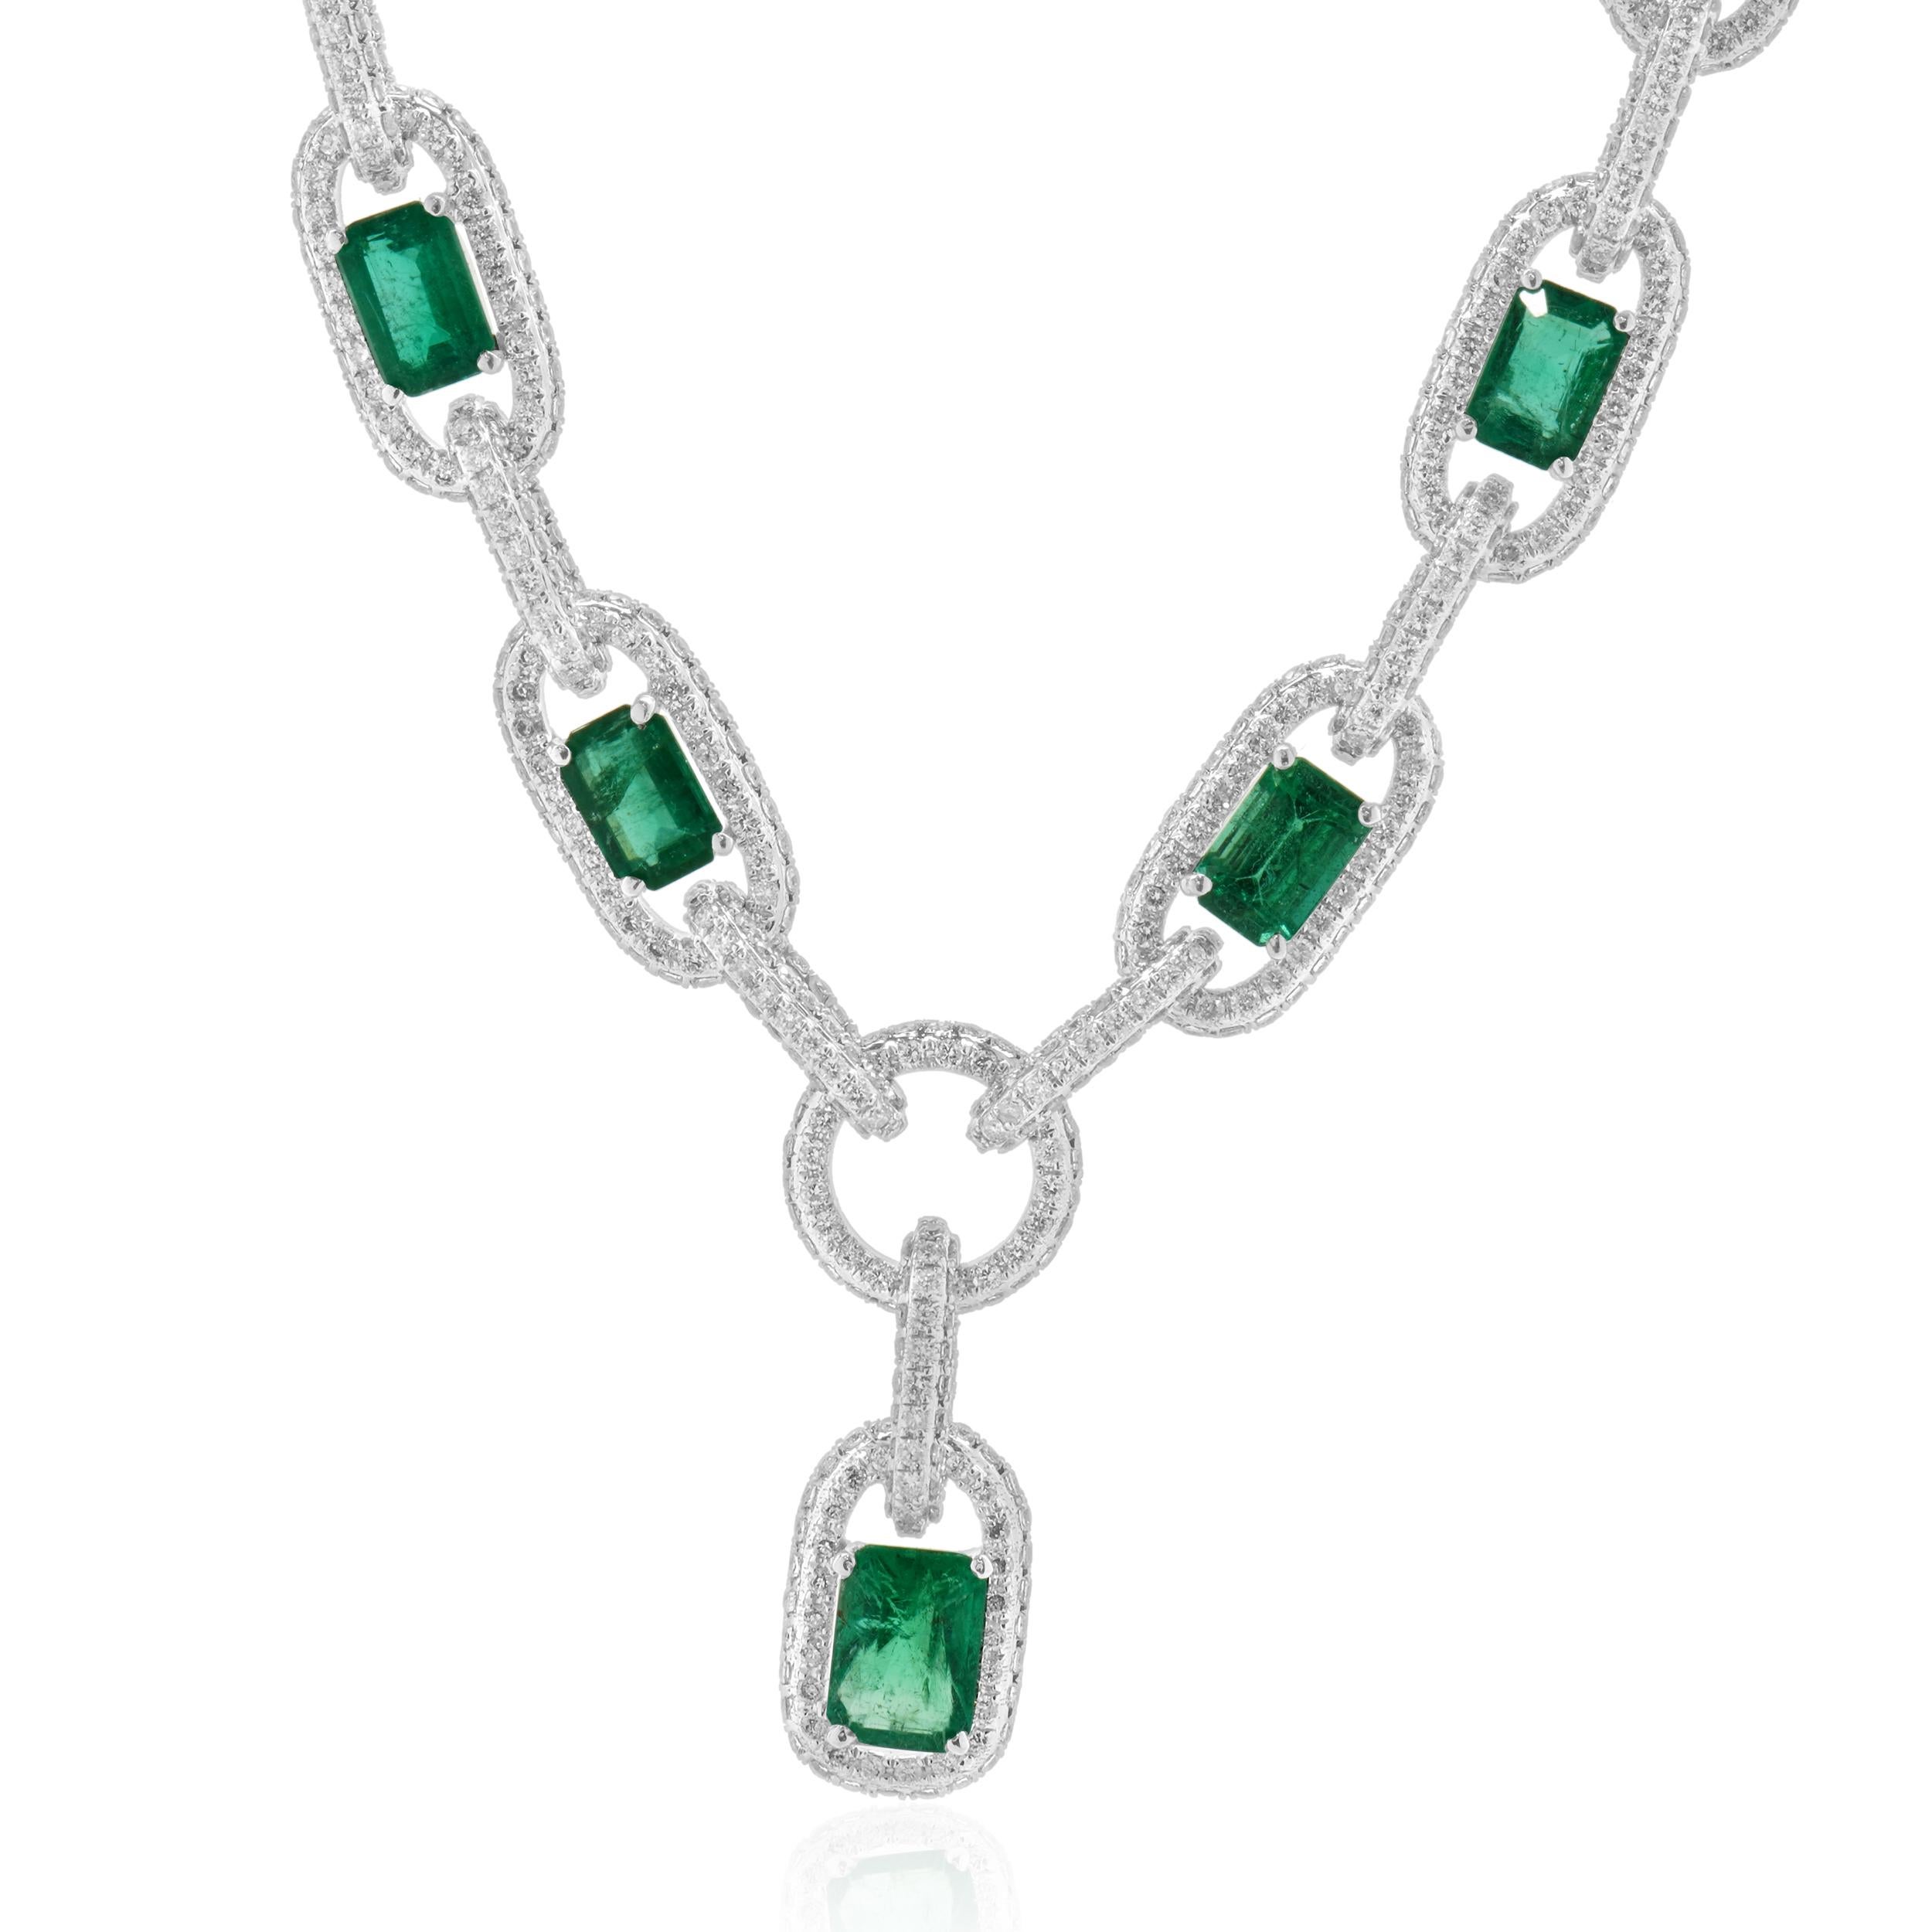 Designer: custom
Material: 14K white gold
Diamond: 1020 round brilliant cut = 5.10cttw
Color: G
Clarity: VS-SI1
Emerald: 11 = 6.05cttw AAA+
Dimensions: necklace measures 16-inches in length
Weight: 33.13 grams
